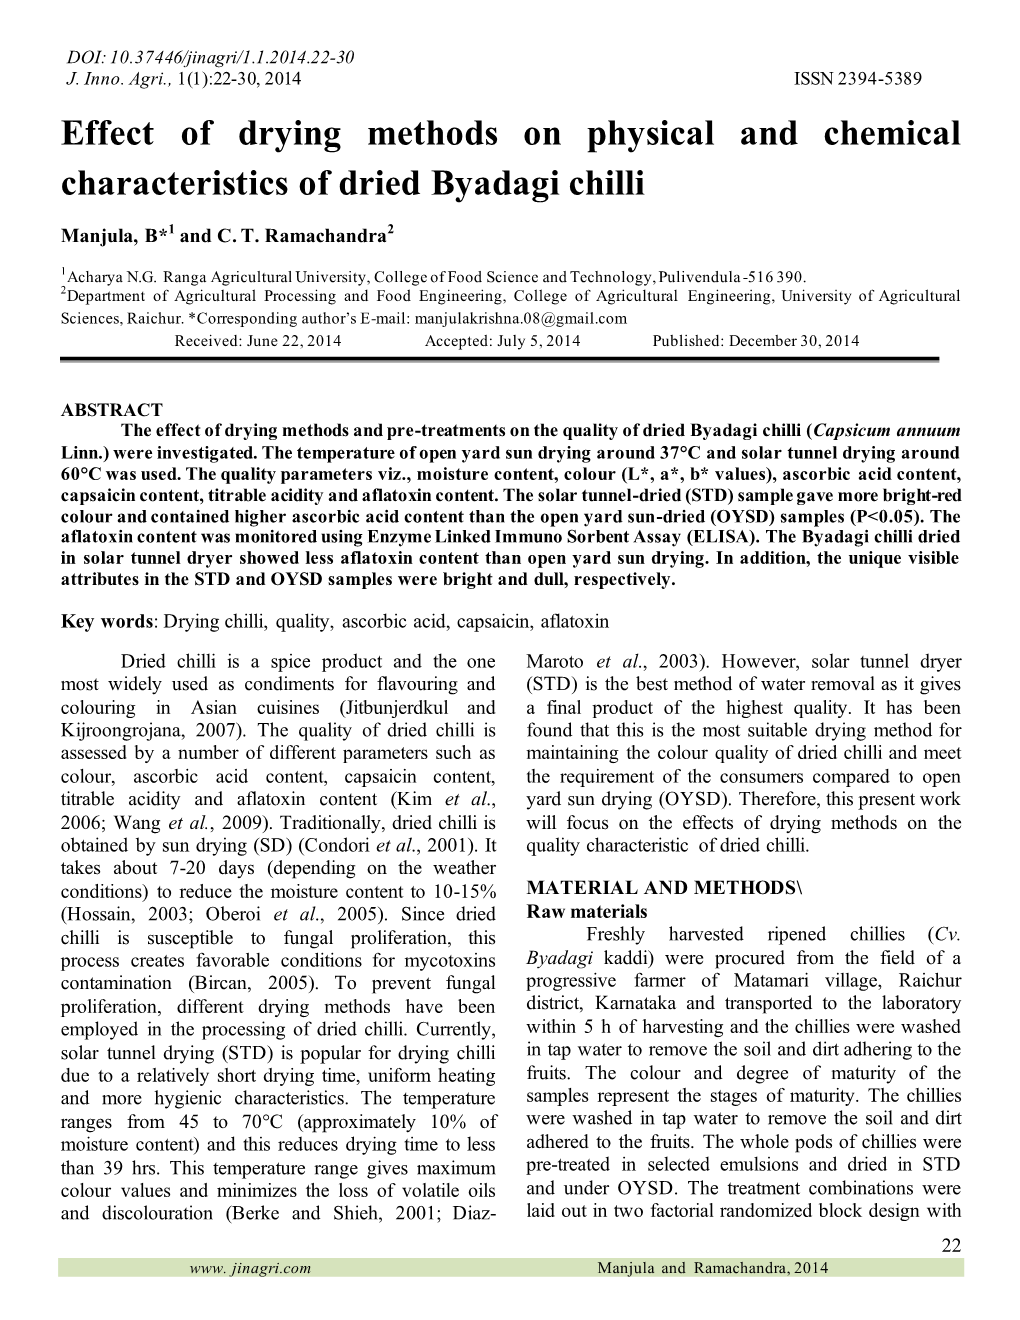 Effect of Drying Methods on Physical and Chemical Characteristics of Dried Byadagi Chilli